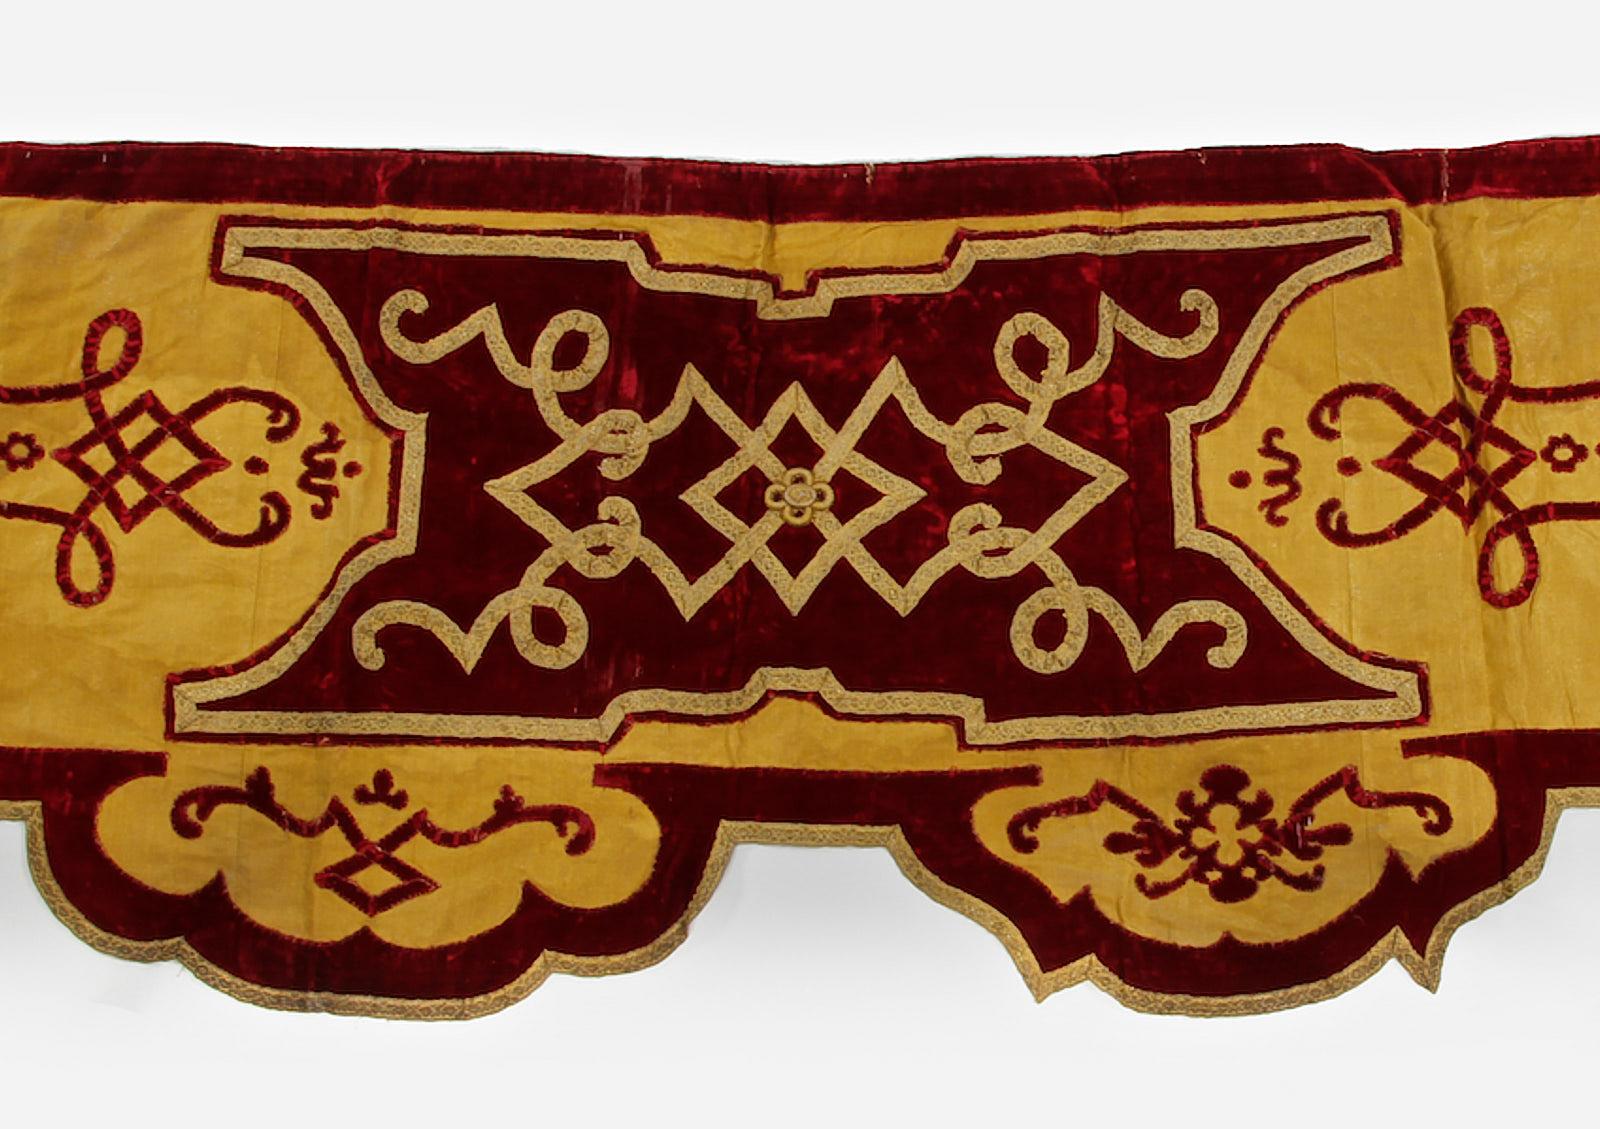 Late 19th century velvet and lame’ curtain pelmet, English, Holland House, London, circa 1860-1890.

The section of curtain pelmet in renaissance style, centred by a crimson velvet cartouche with gold braid strap-work, flanked by lame’ panels with